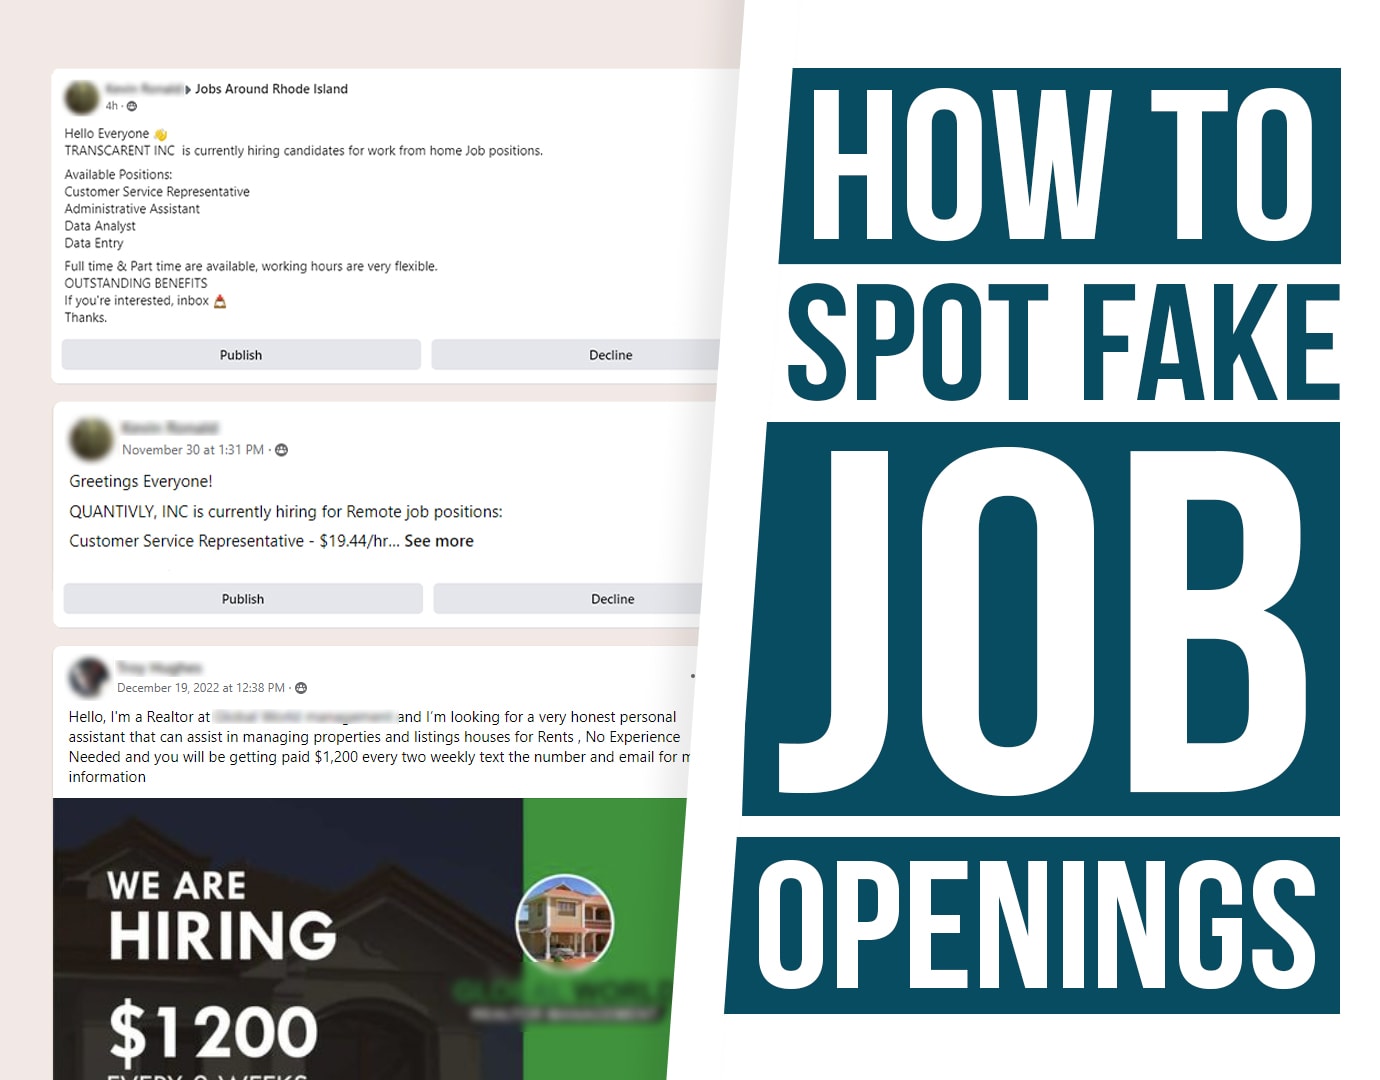 How To Spot Fake Job Openings